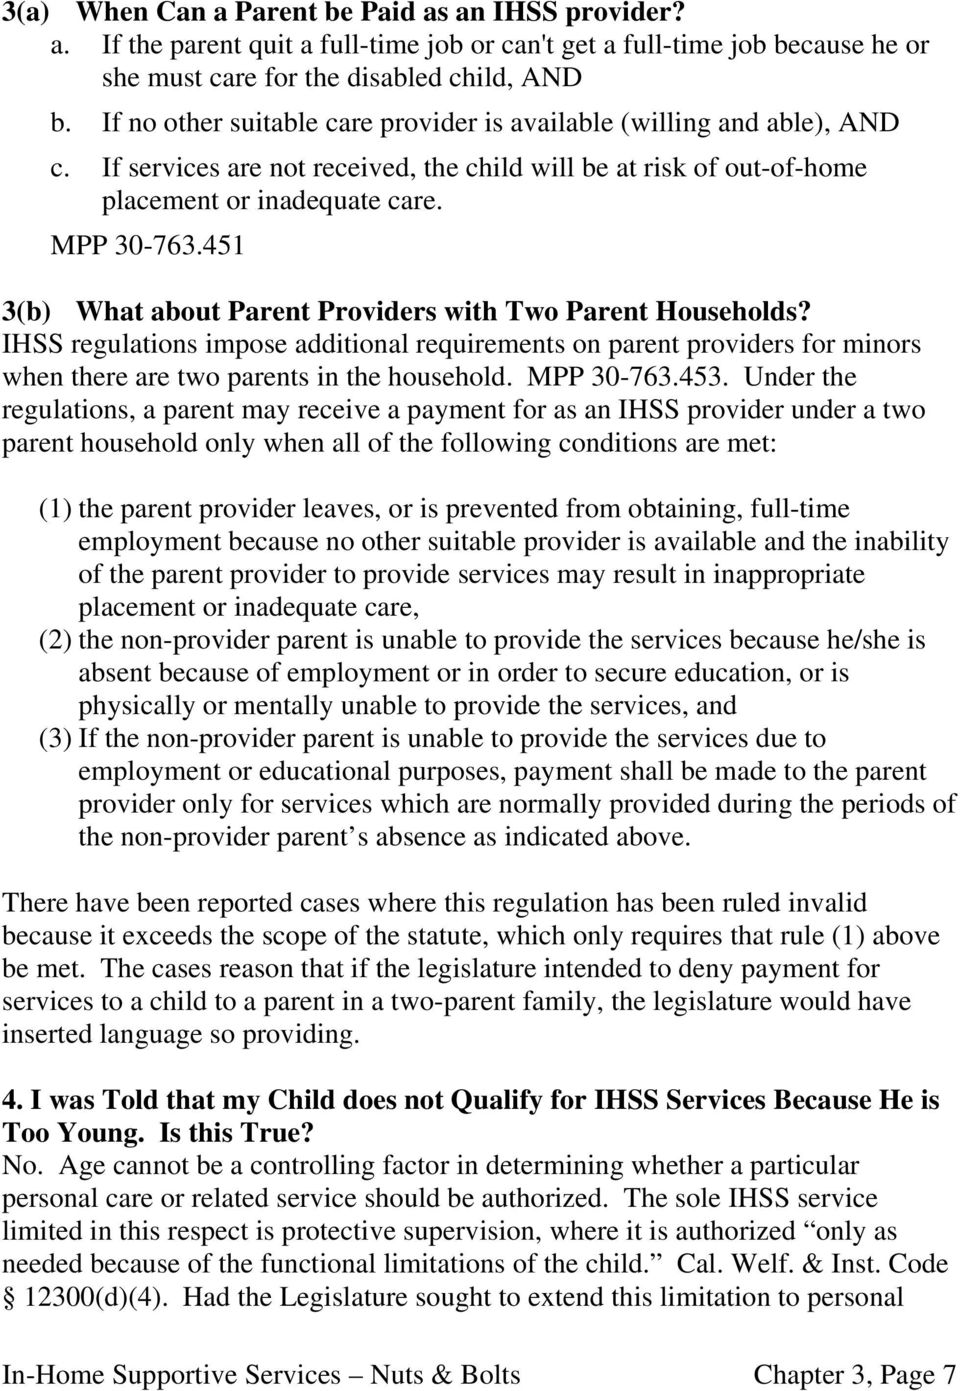 451 3(b) What about Parent Providers with Two Parent Households? IHSS regulations impose additional requirements on parent providers for minors when there are two parents in the household. MPP 30-763.